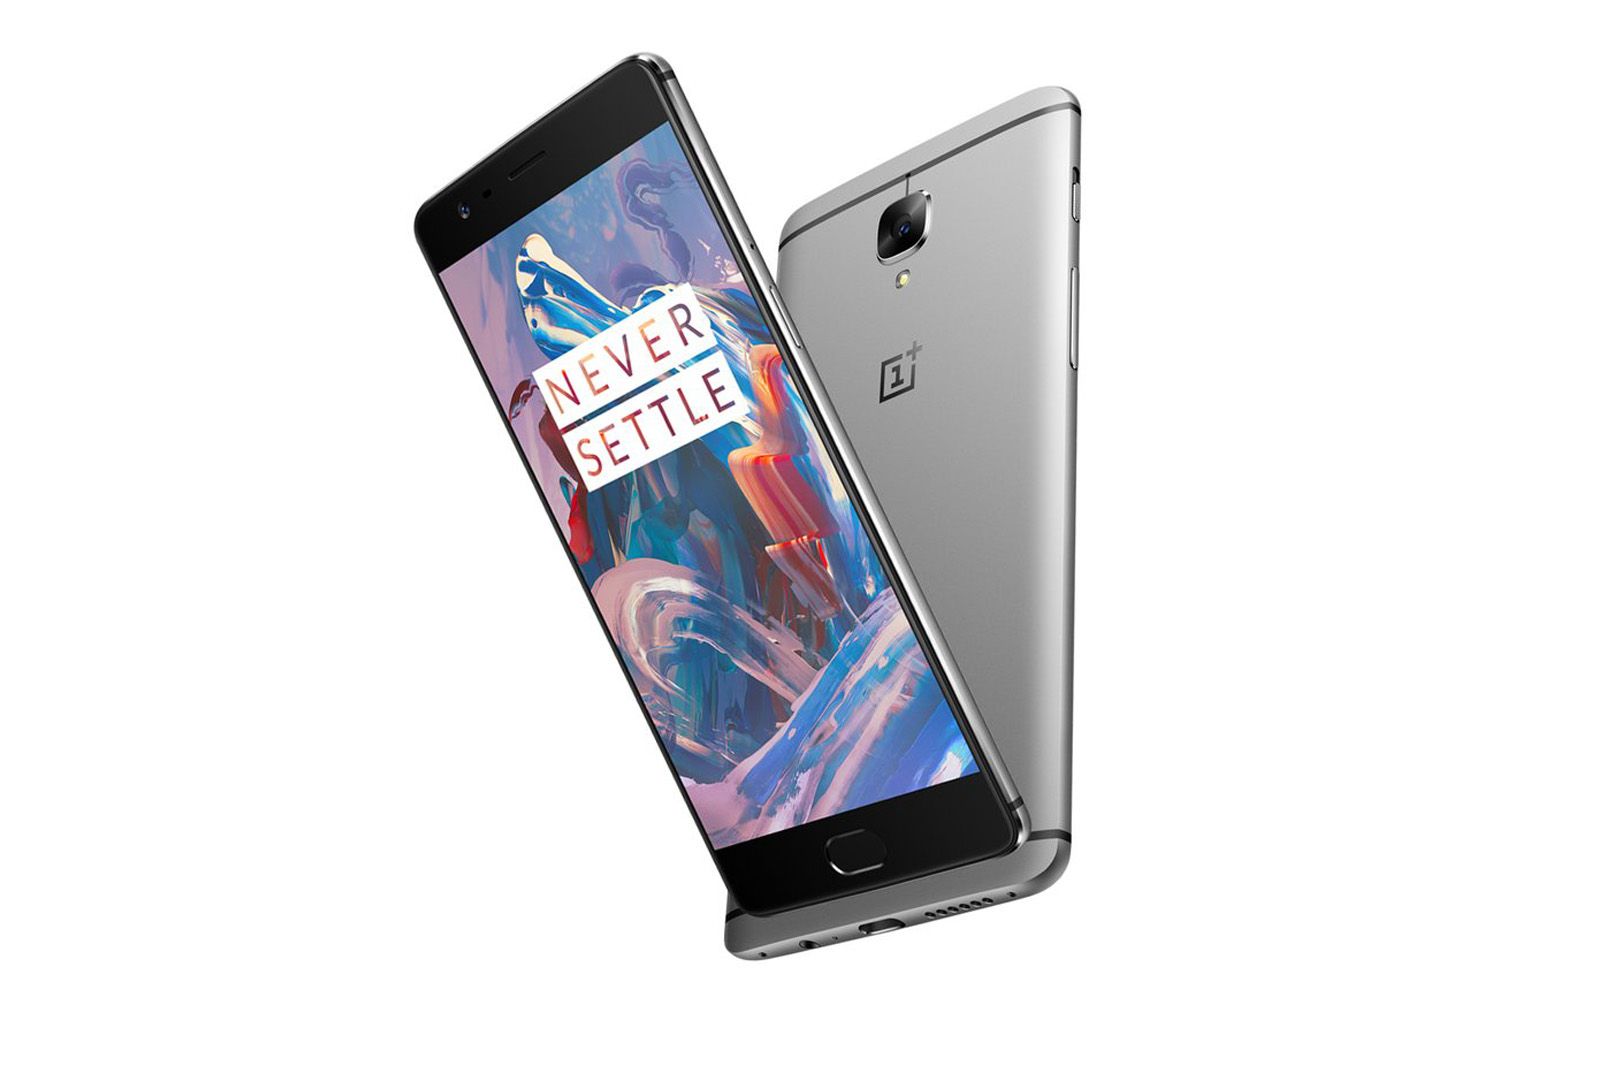 oneplus 3 camera photos shown off by ceo check them out here image 1